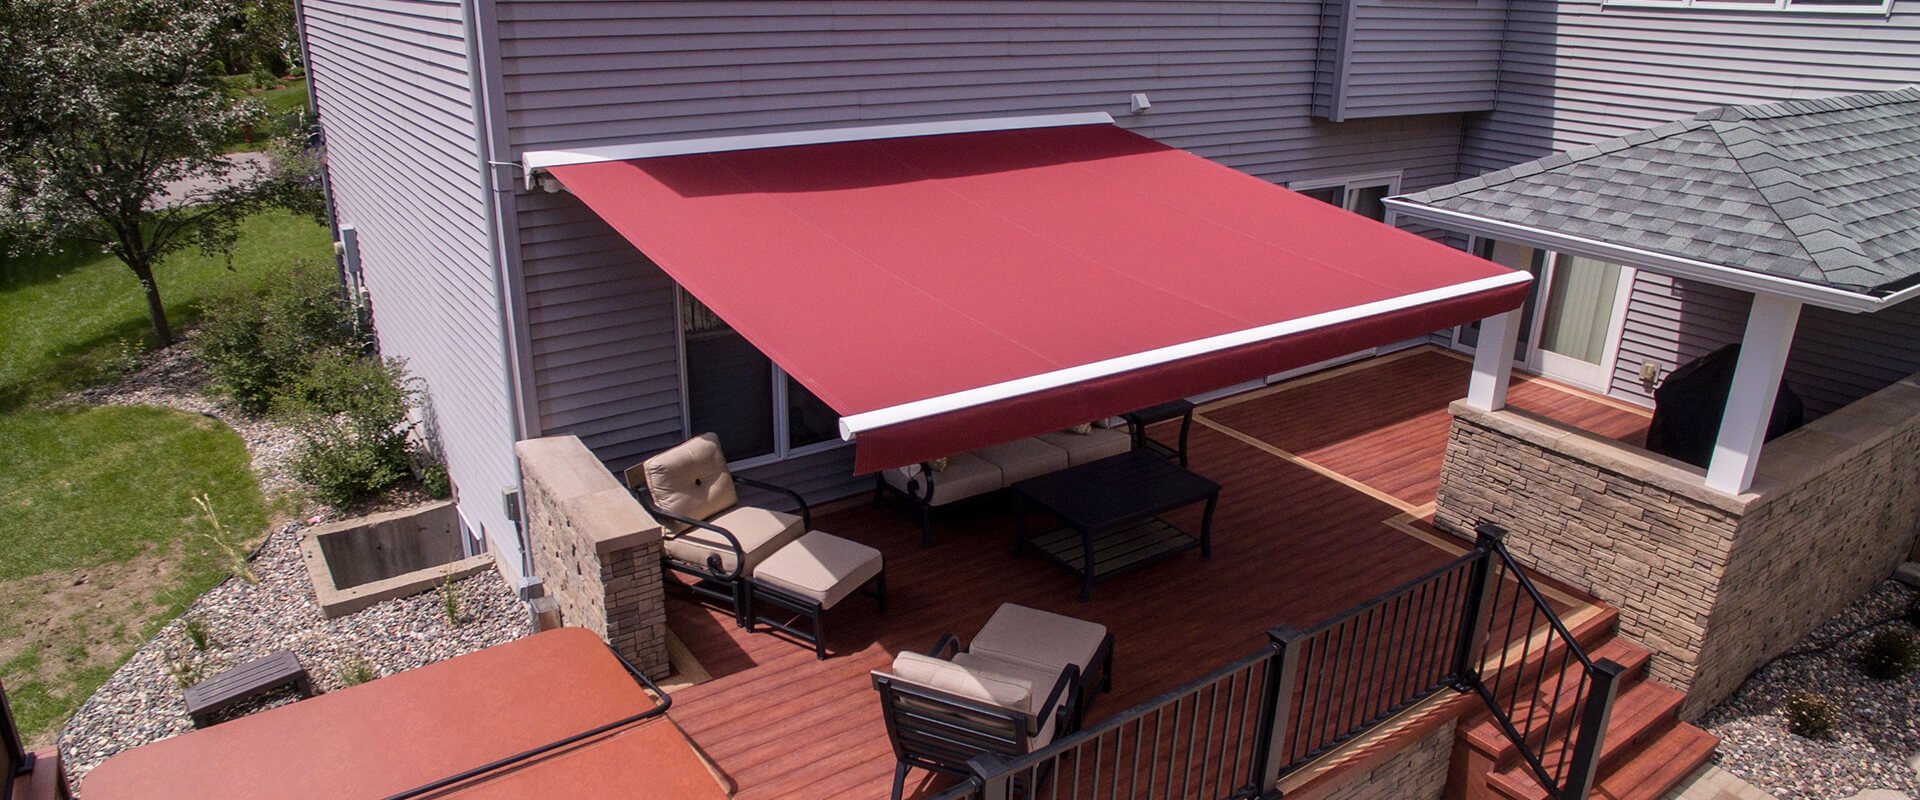 How Much Do Retractable Awnings Cost?